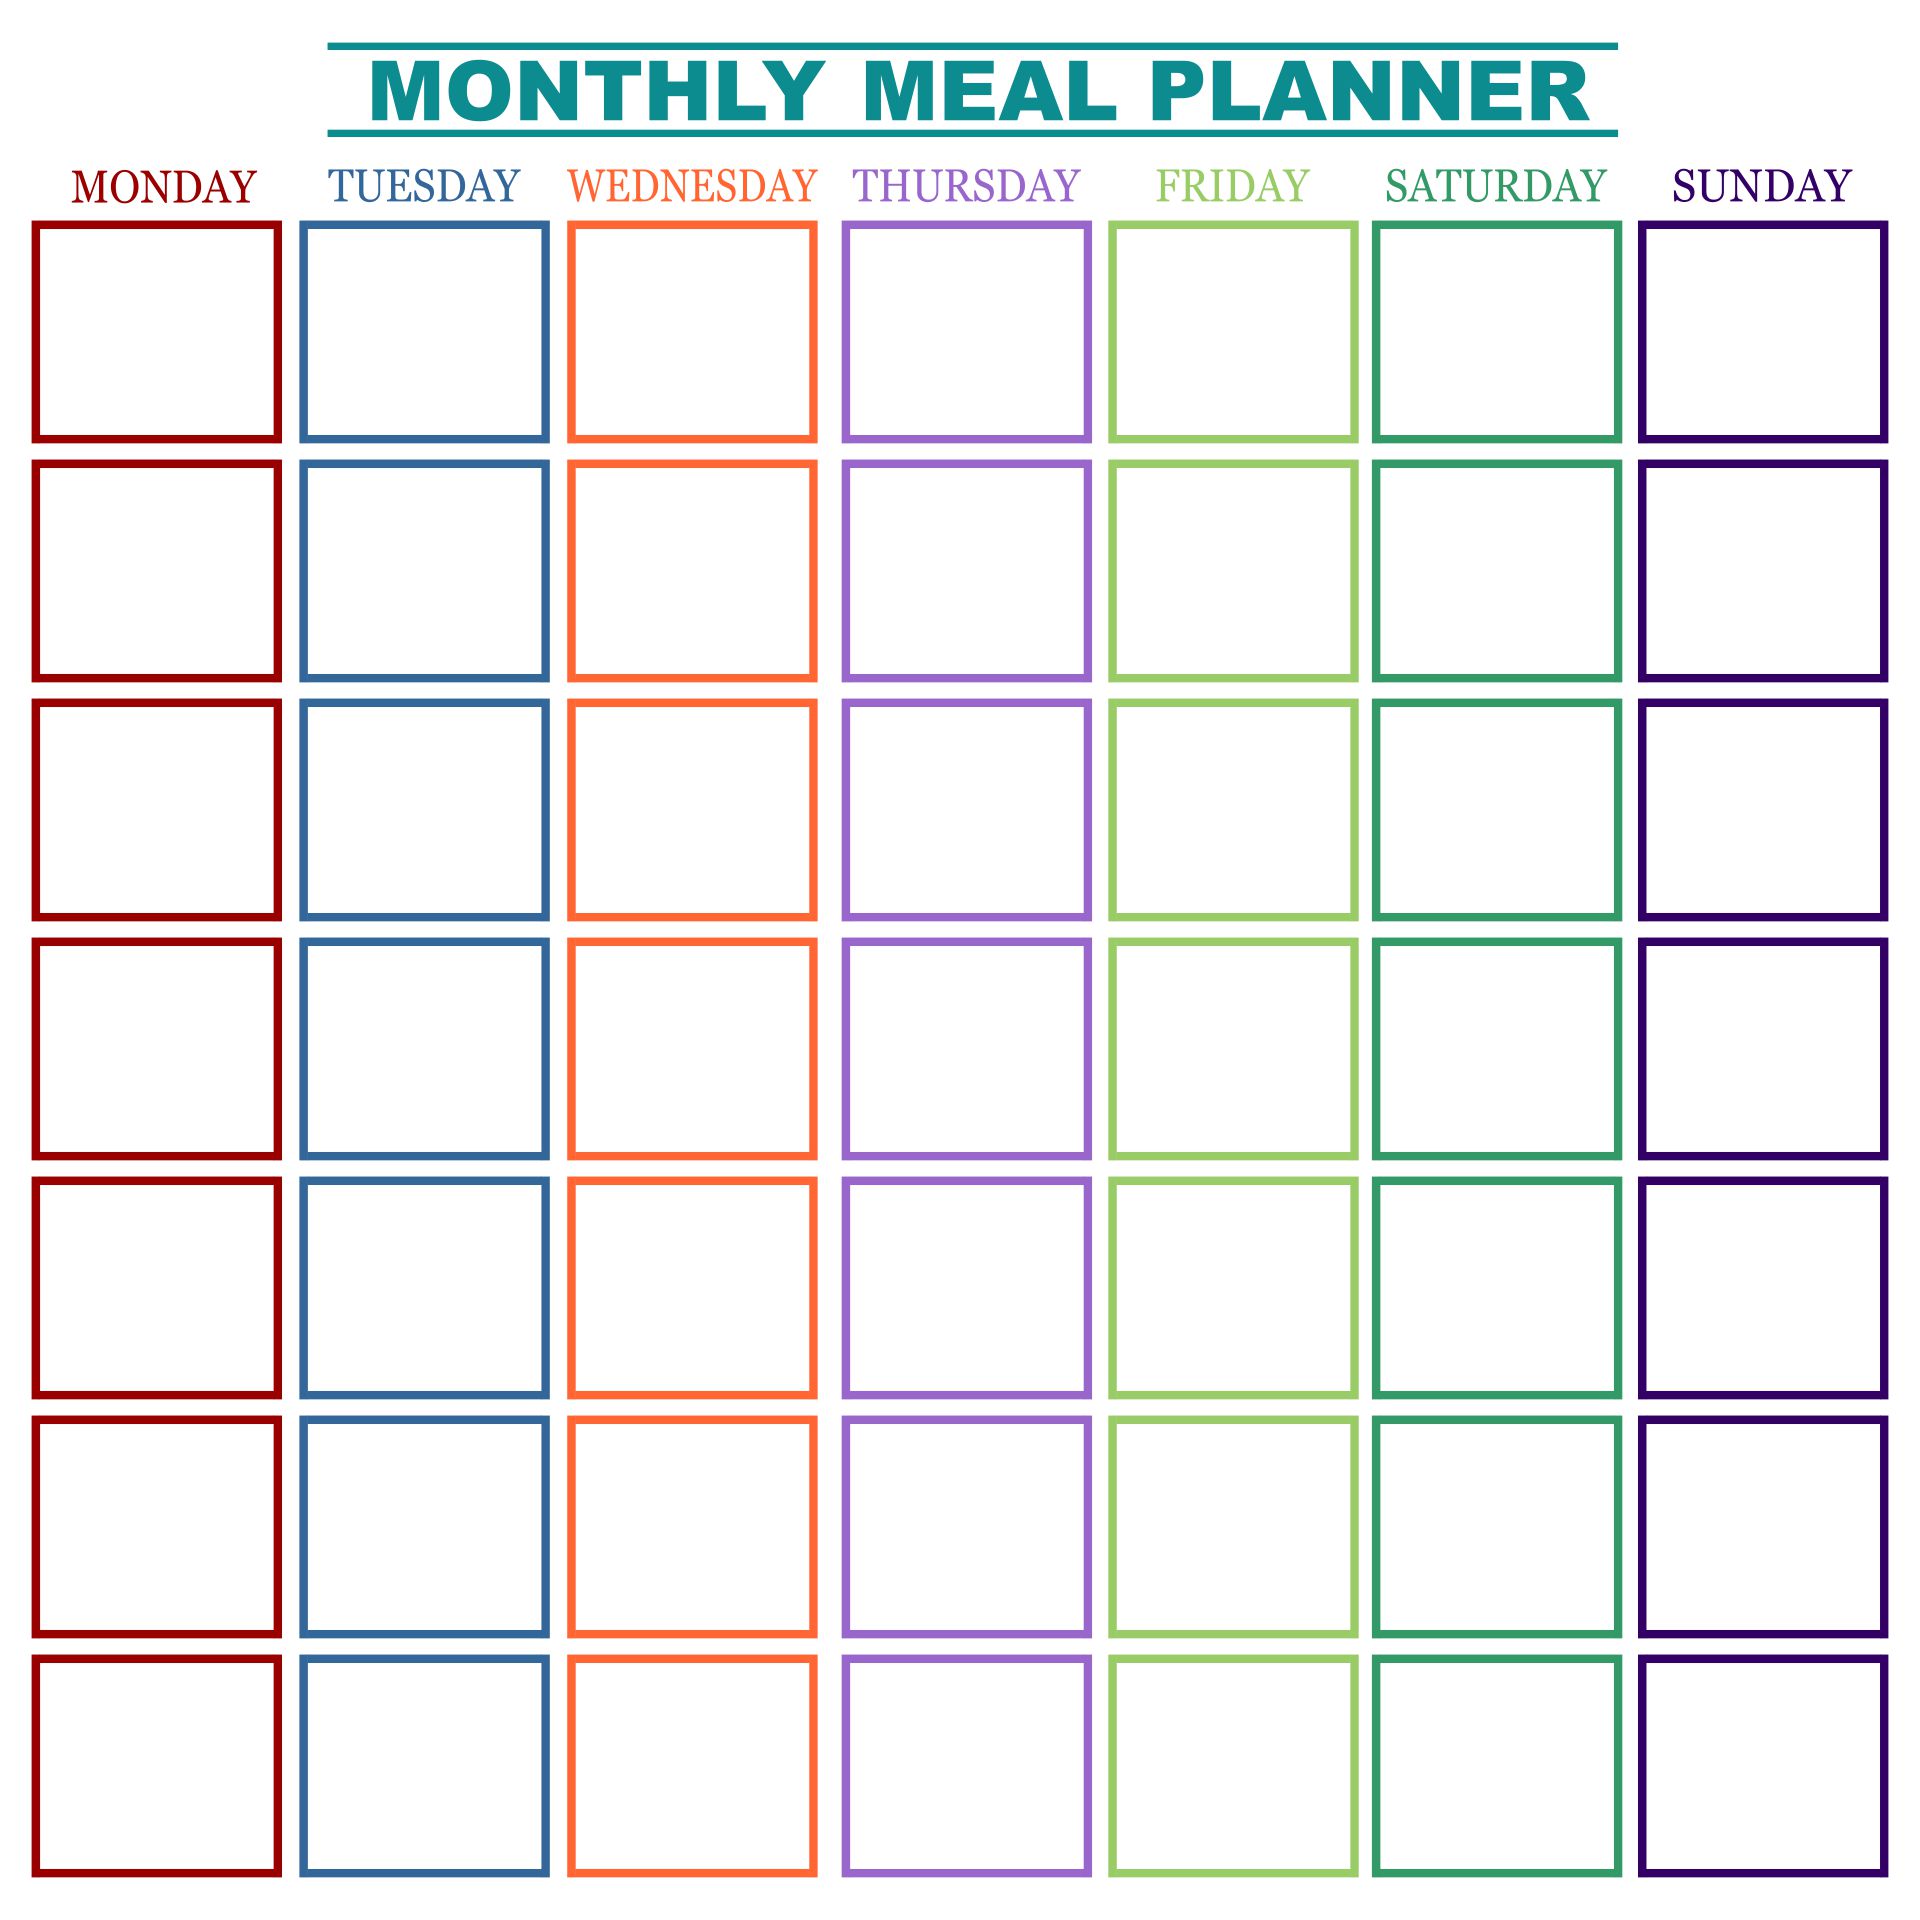 8-best-images-of-printable-monthly-dinner-planner-printable-monthly-meal-planner-calendar